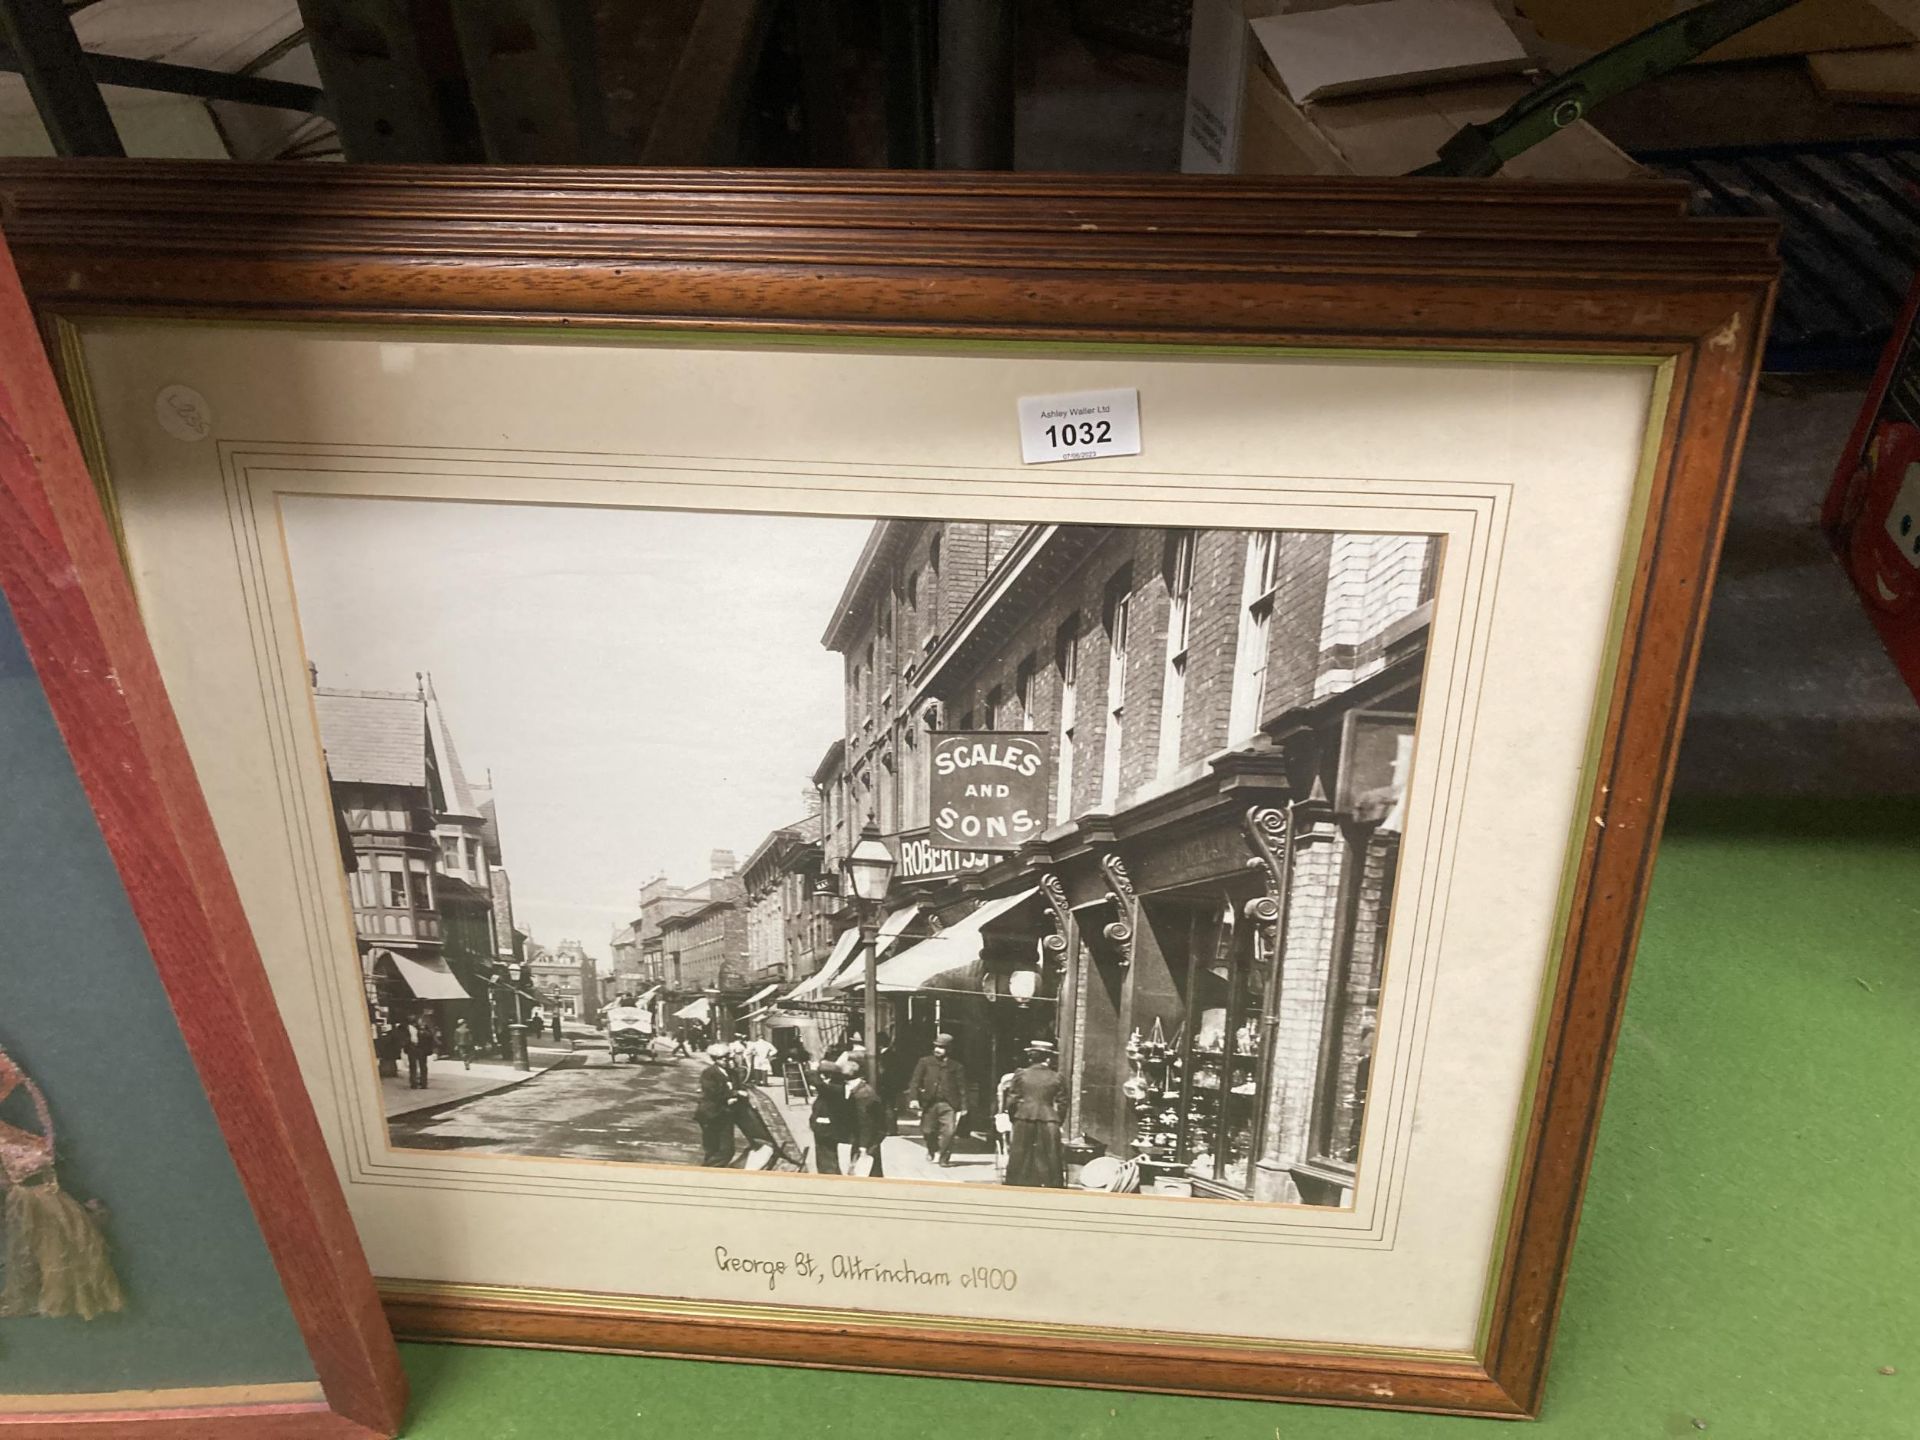 THREE FRAMED PRINTS OF ALTRINCHAM IN THE 1900'S